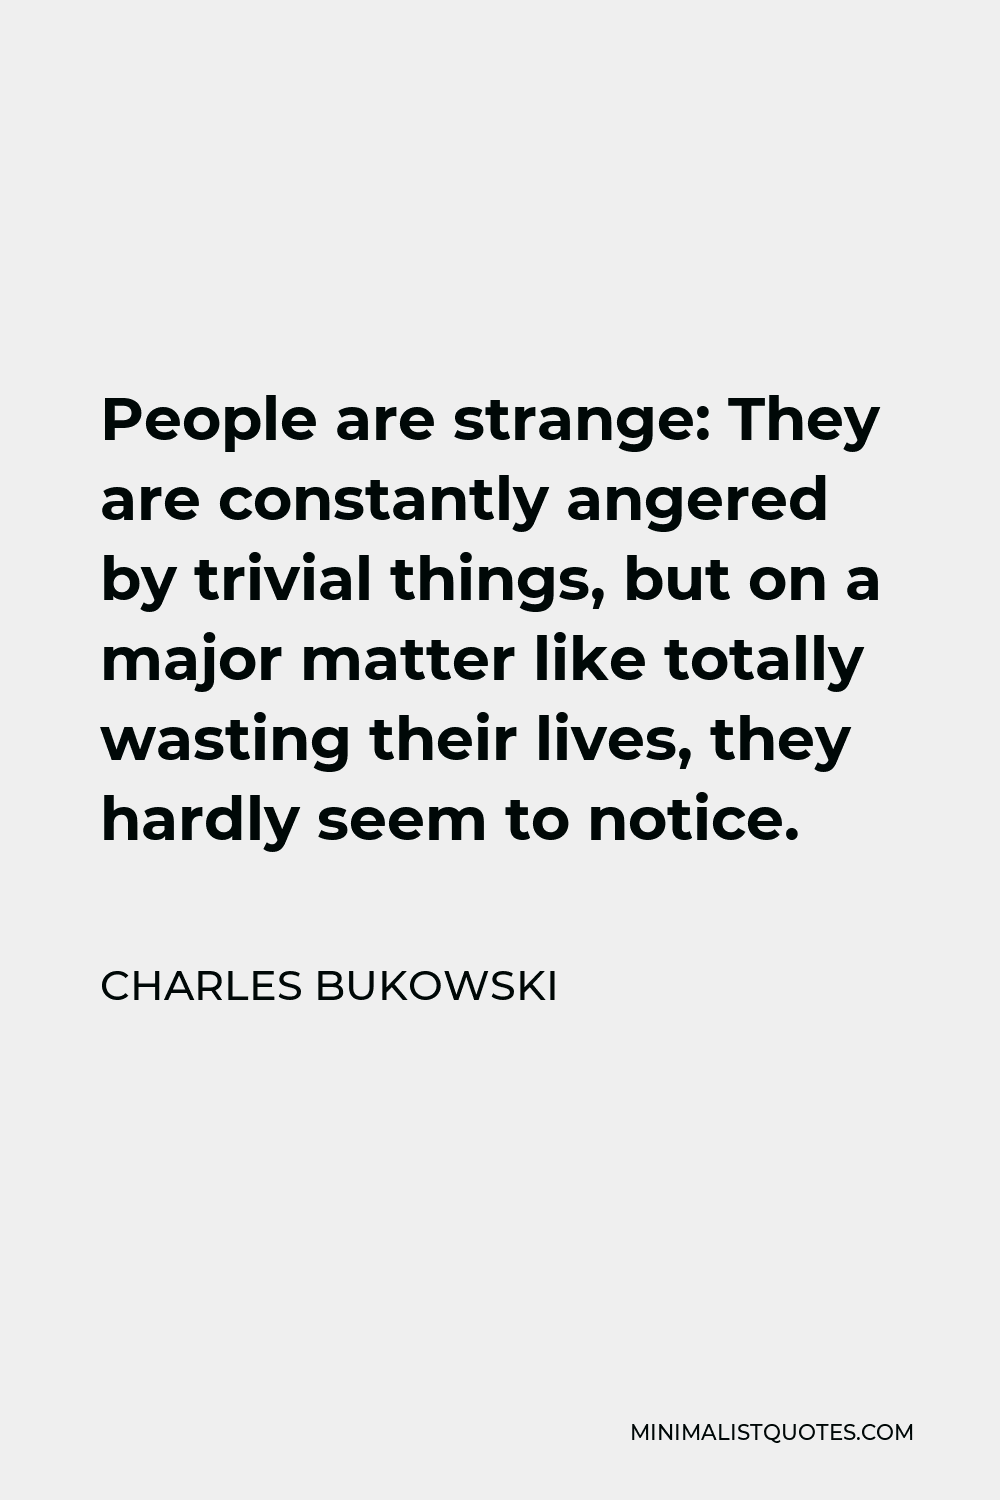 Charles Bukowski Quote - People are strange: They are constantly angered by trivial things, but on a major matter like totally wasting their lives, they hardly seem to notice.